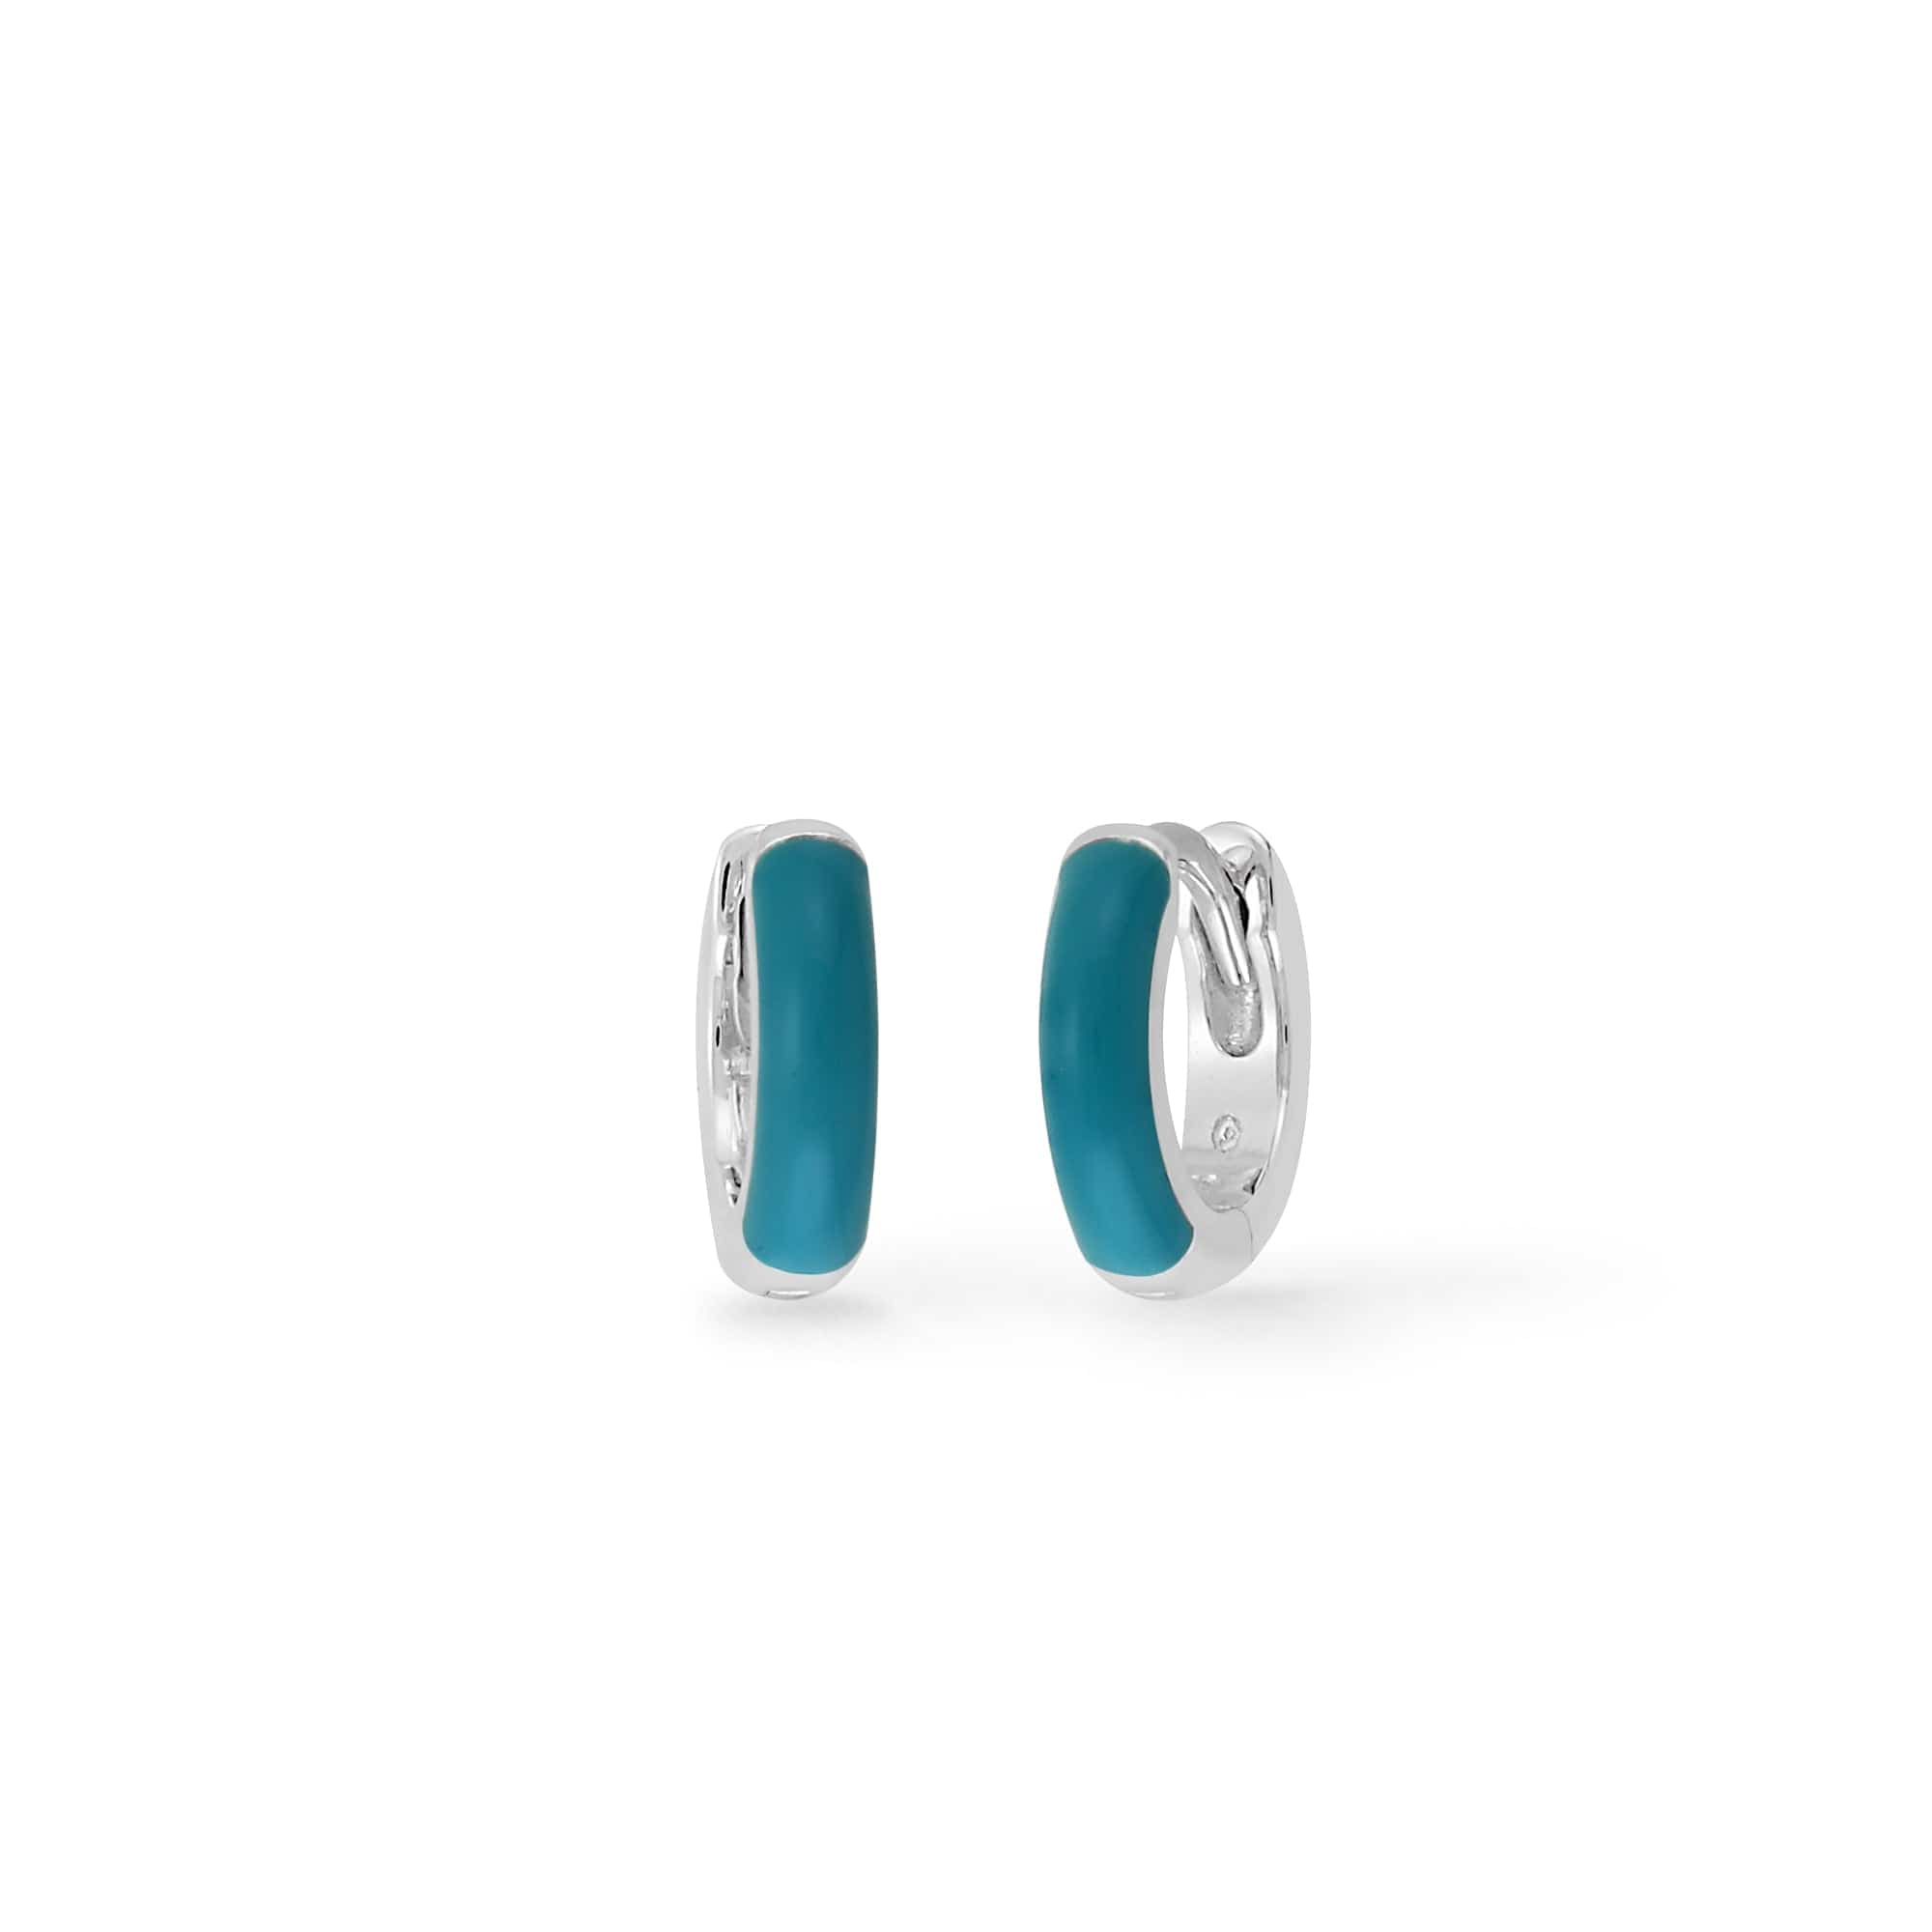 Boma Jewelry Earrings Cyan / Sterling Silver Mini Huggie Hoops with Color